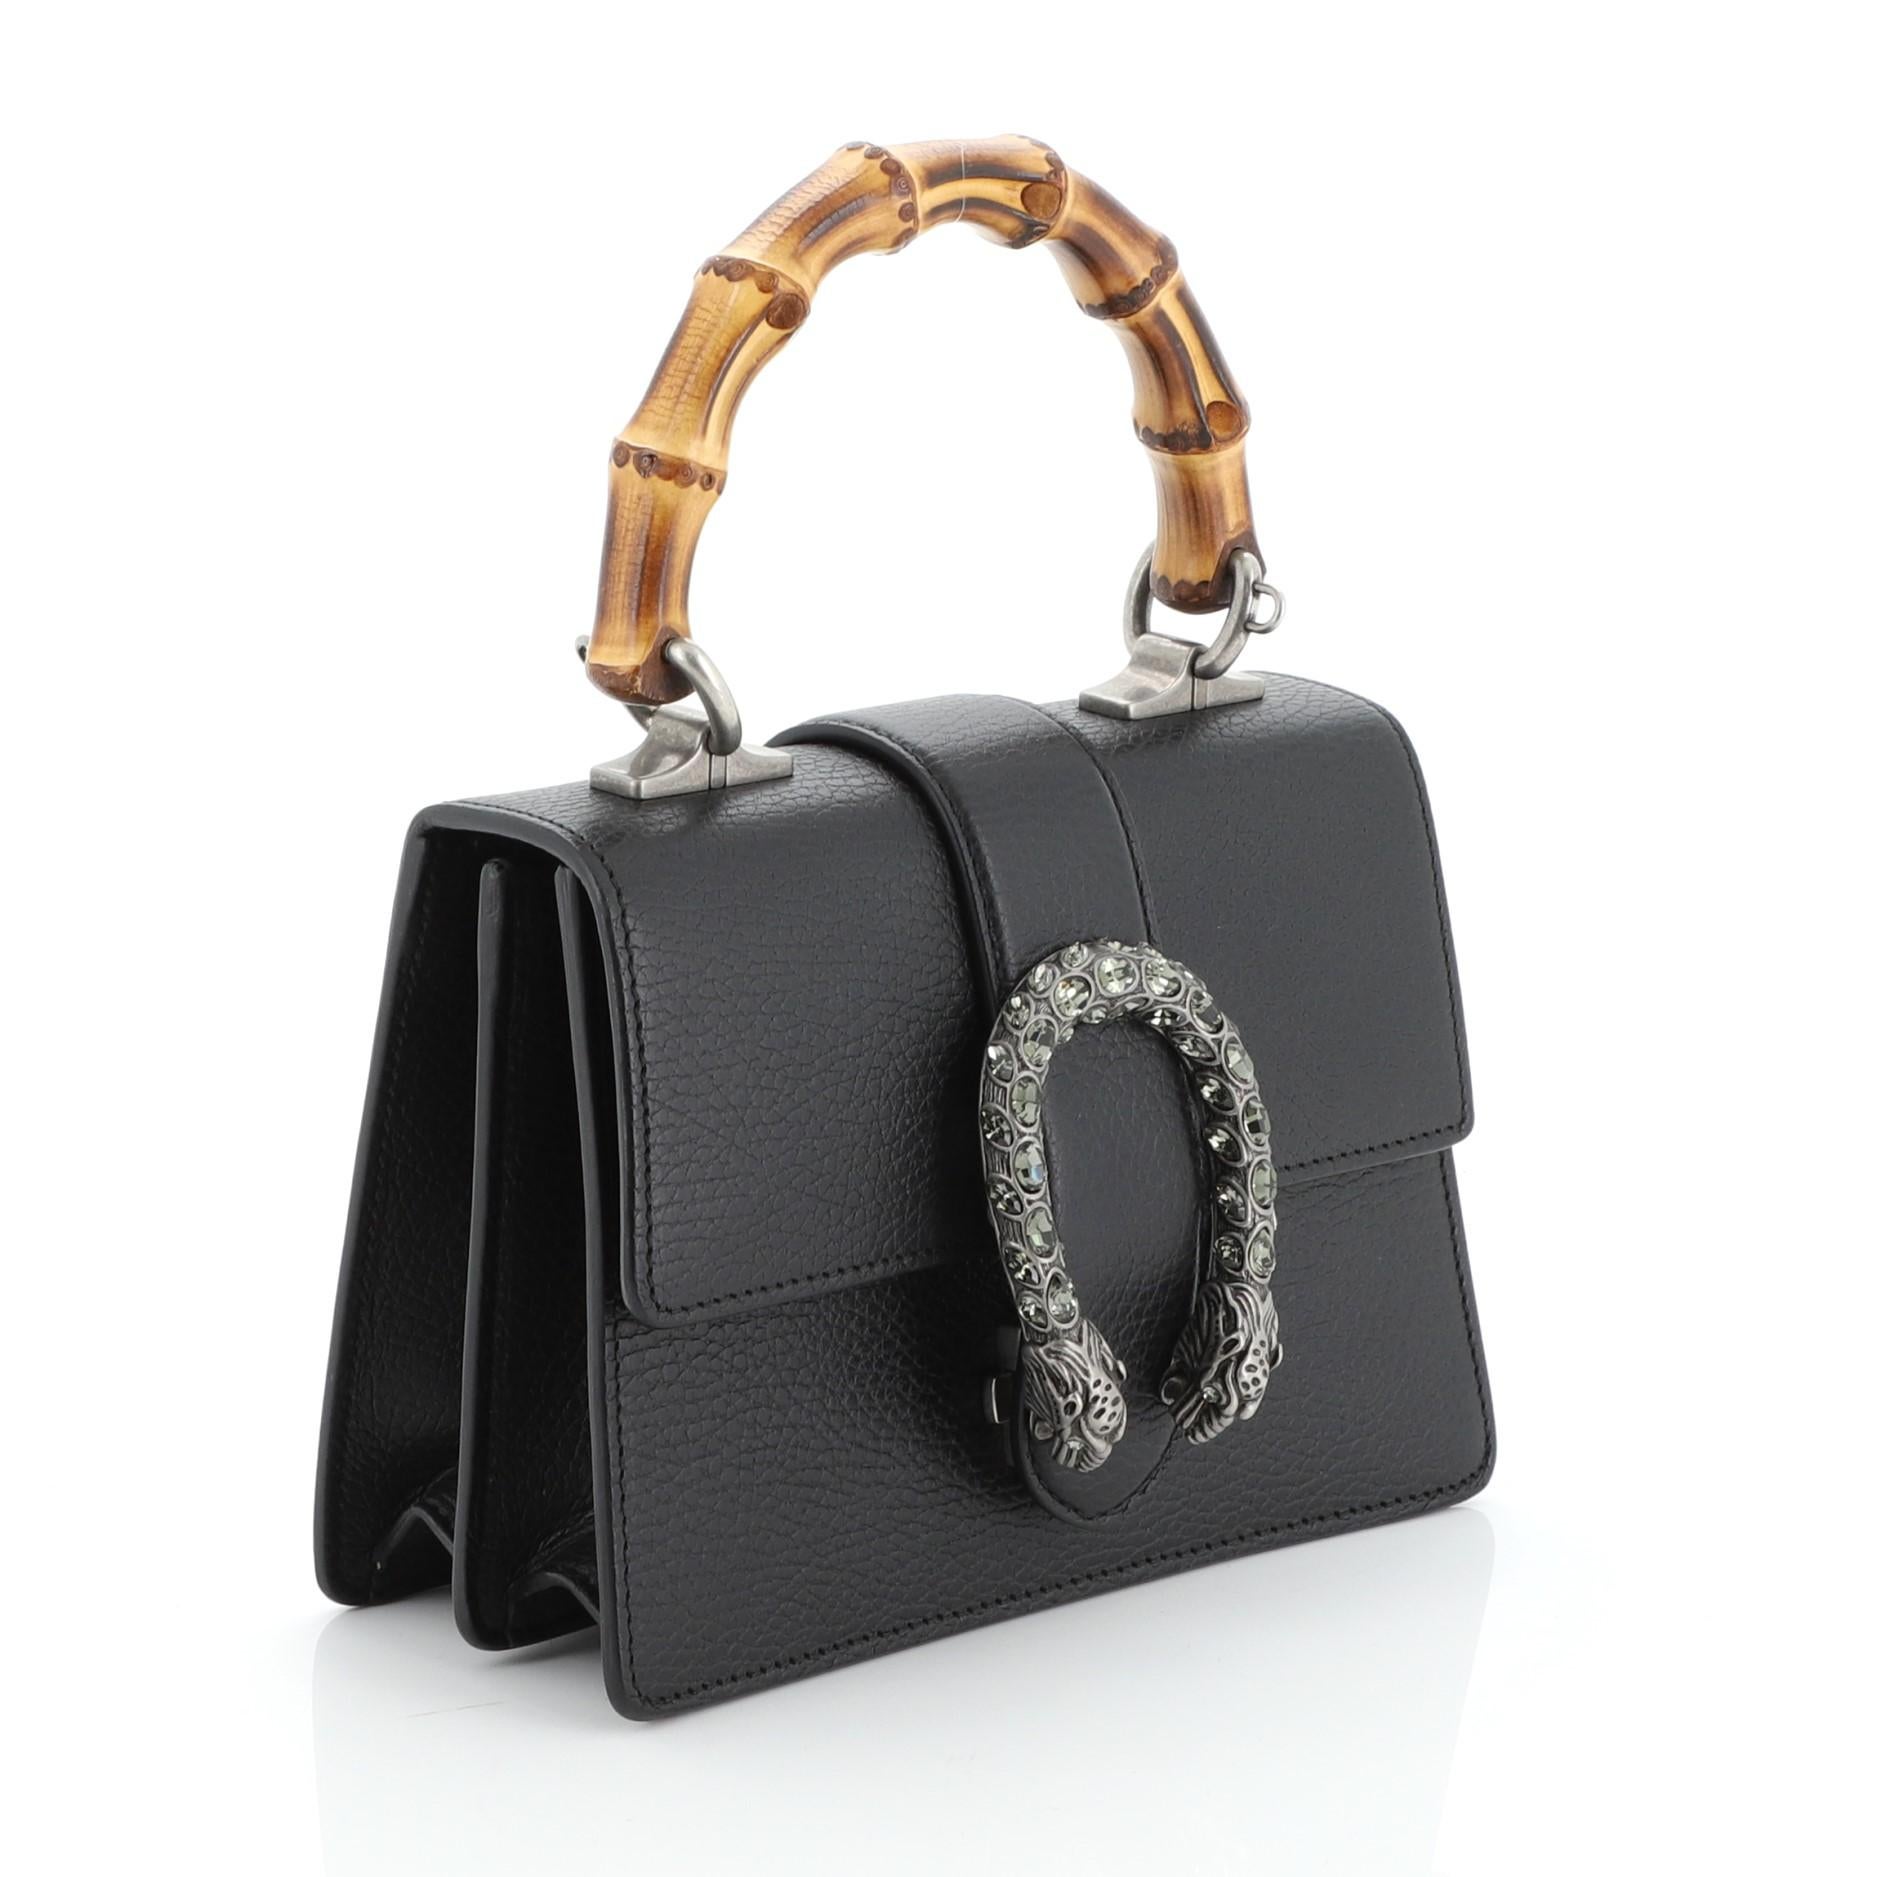 This Gucci Dionysus Bamboo Top Handle Bag Leather Mini, crafted from black leather, features a bamboo top handle, textured tiger head spur detail on its flap, and aged silver-tone hardware. Its flap closure with side release opens to a neutral